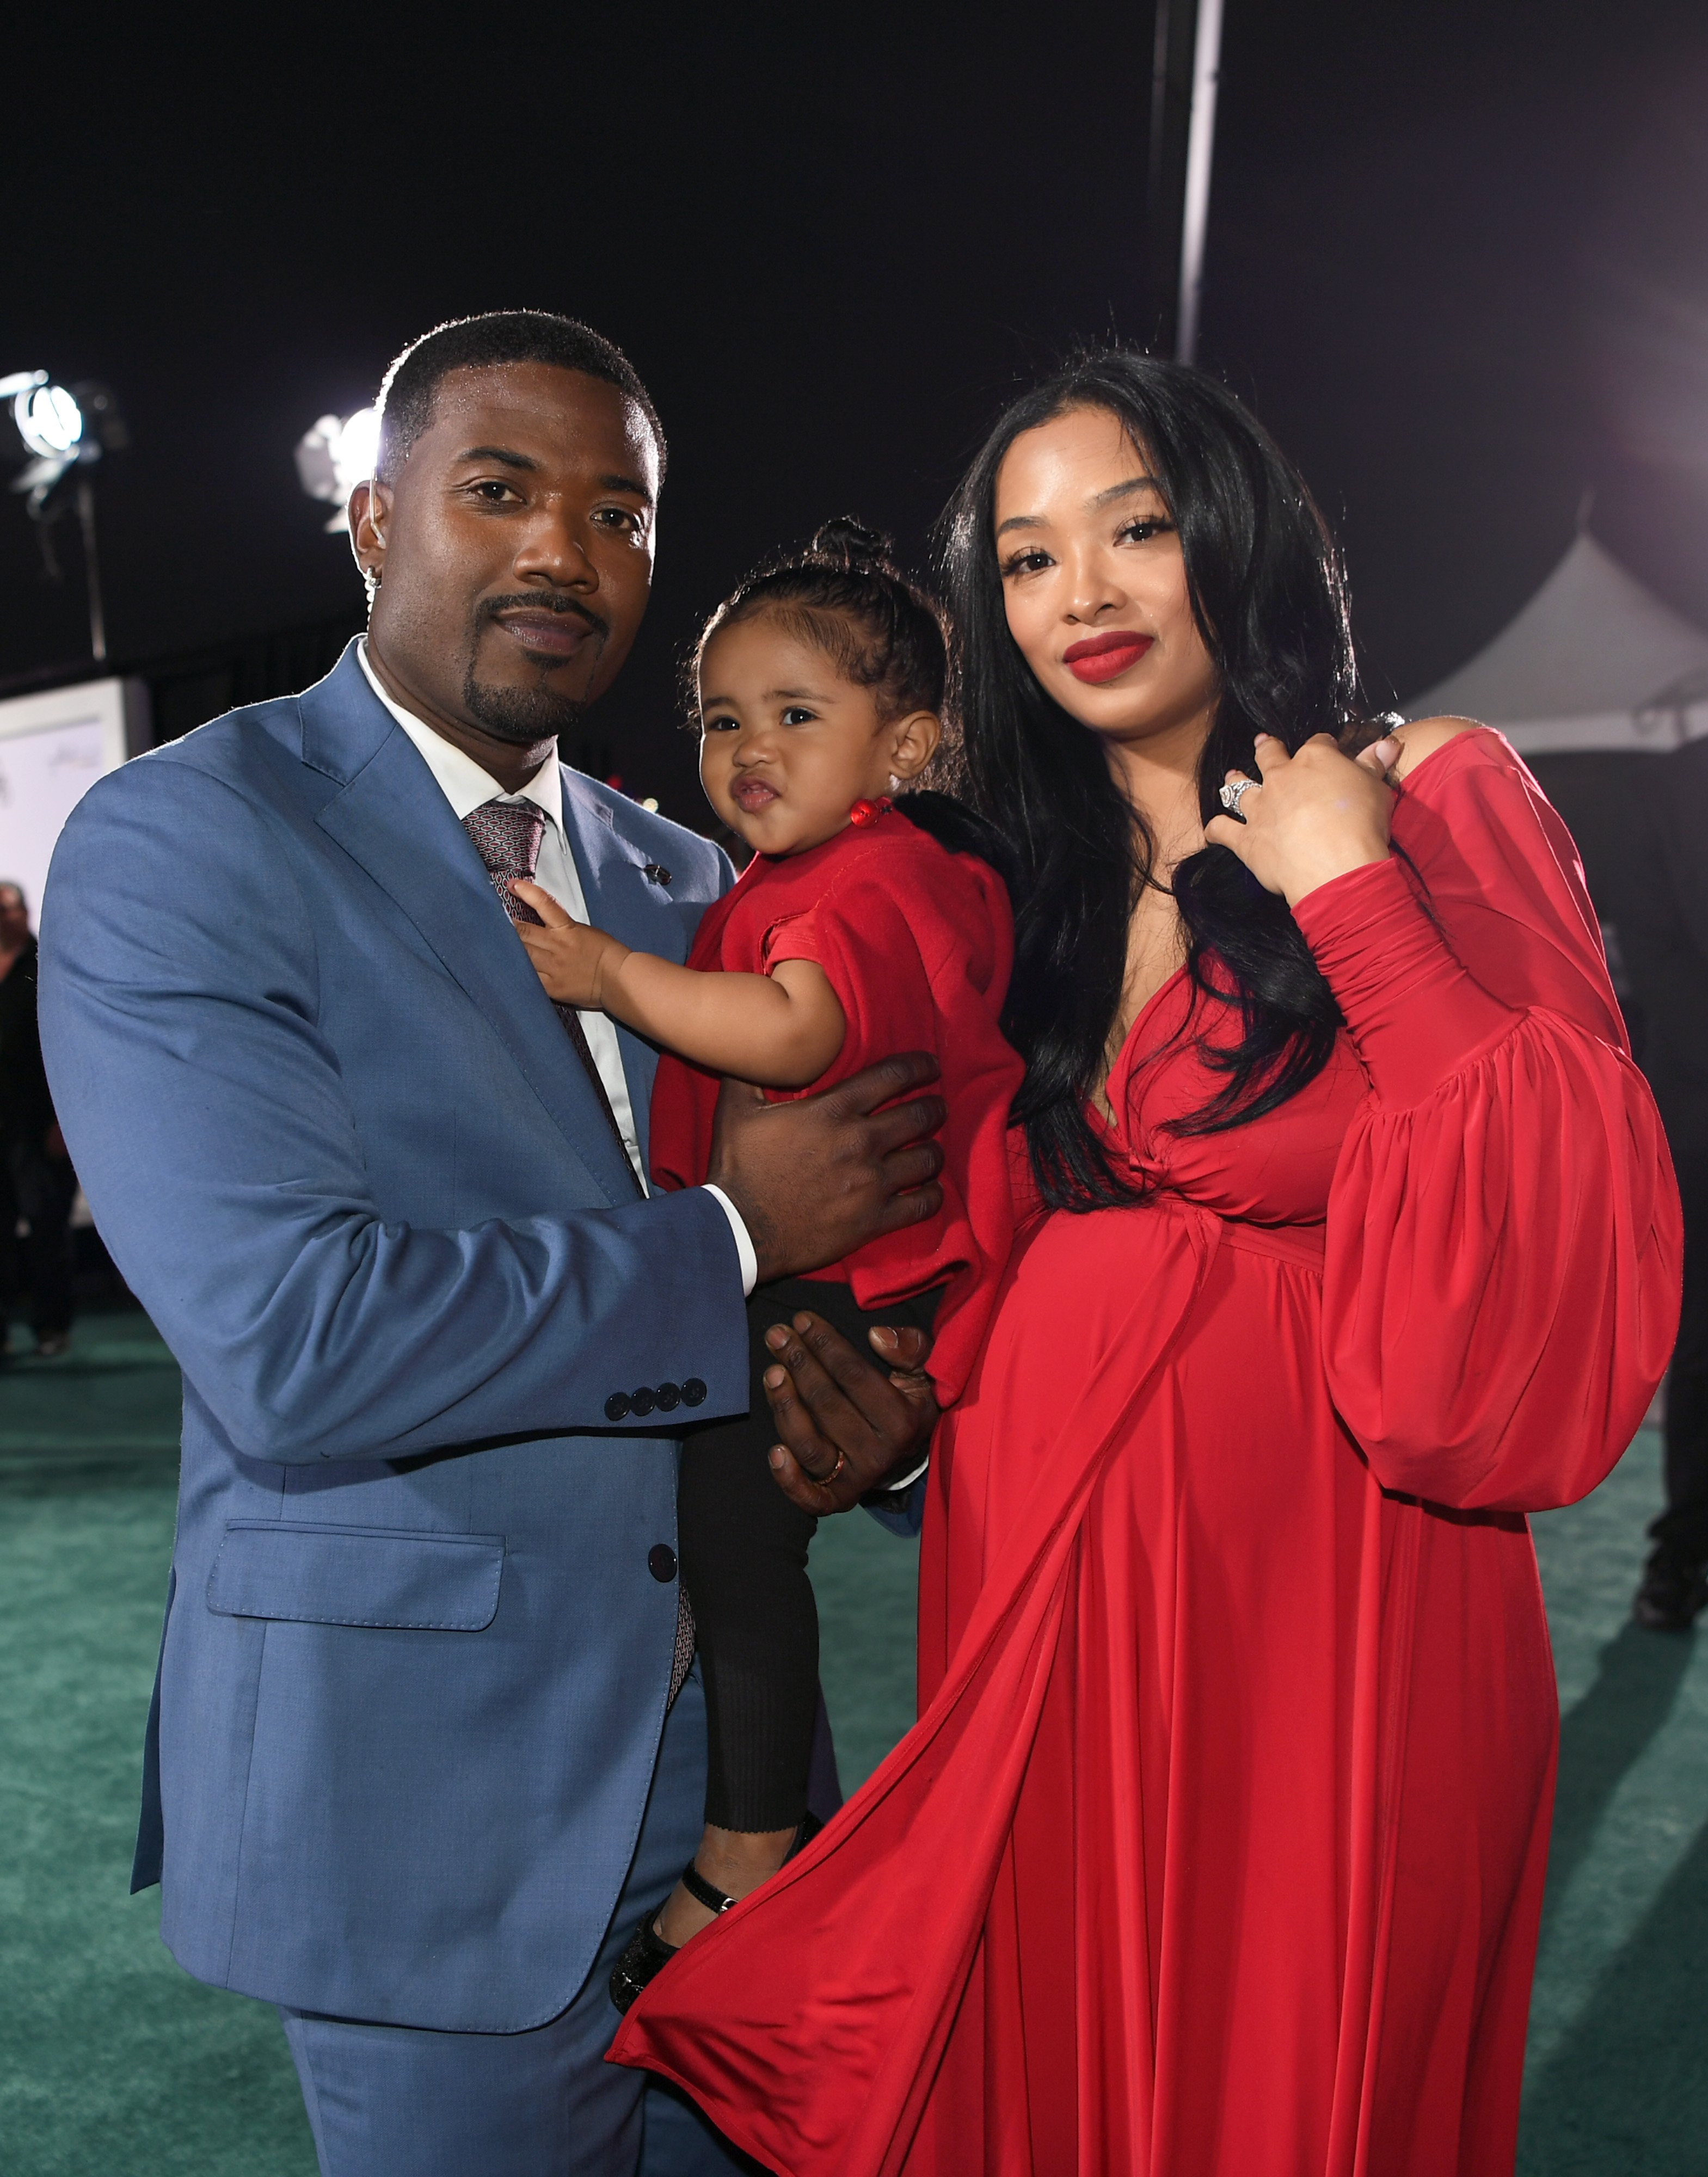 Ray J, Melody Love Norwood, and Princess Love onstage at the 2019 Soul Train Awards presented by BET at the Orleans Arena on November 17, 2019. | Photo: Getty Images